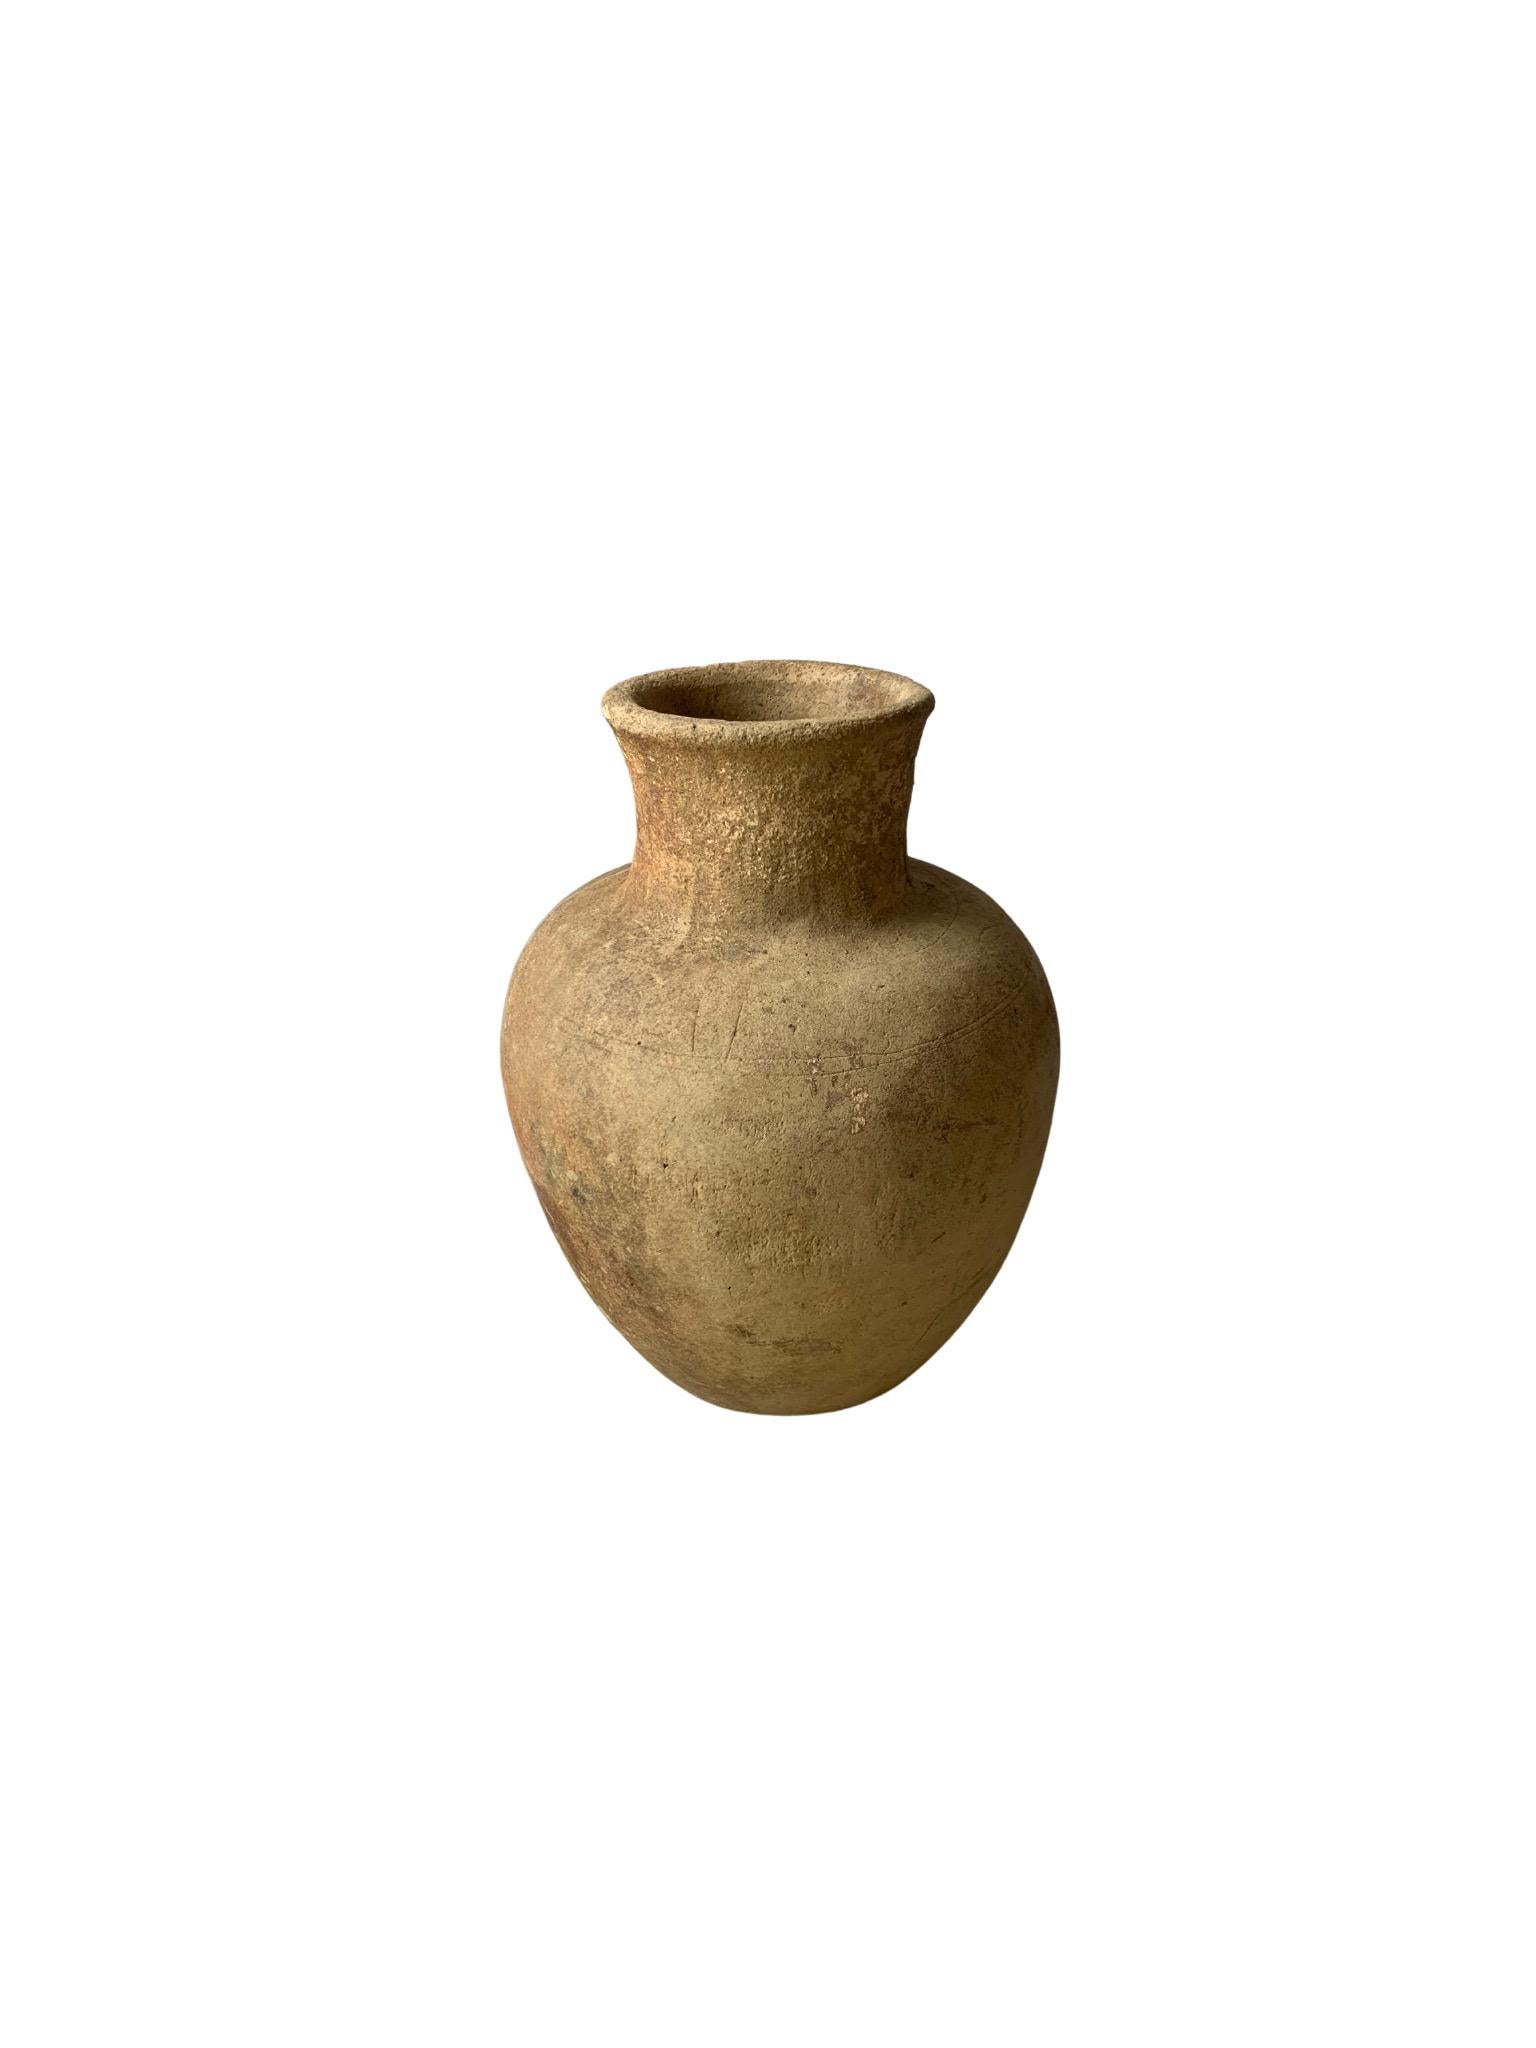 Hand-Crafted Terracotta Jar from Java, Indonesia c. 1900 For Sale